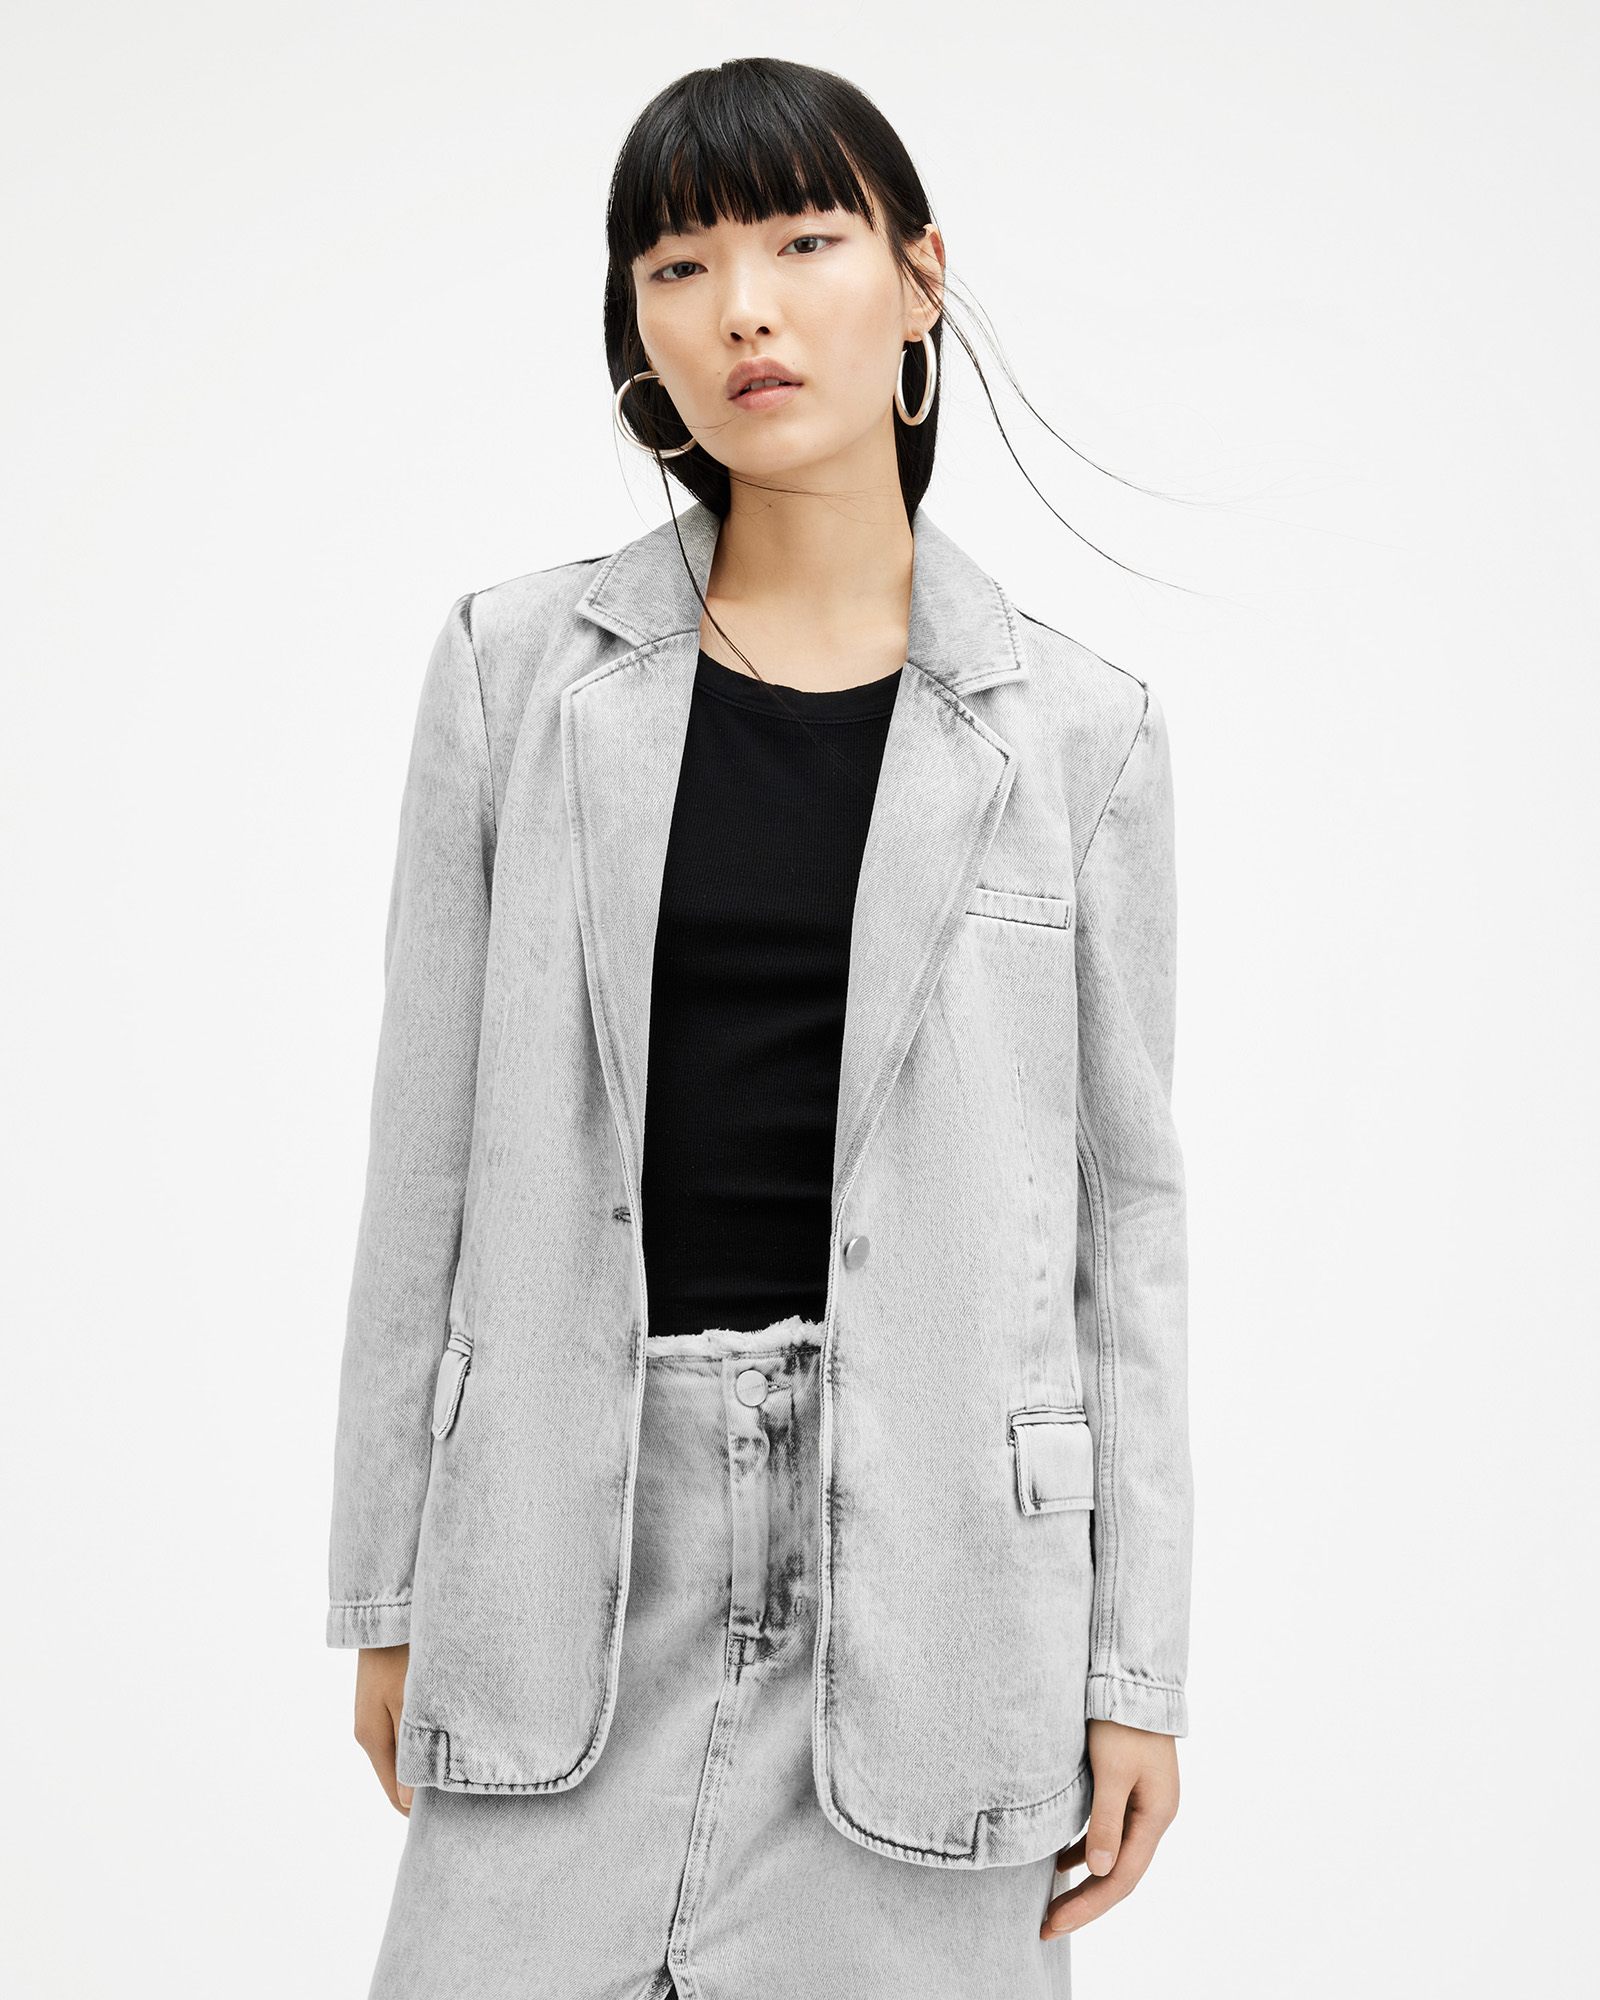 Allsaints Grey Denim Jacket And Women's Skinny Jeans Outfit - Your